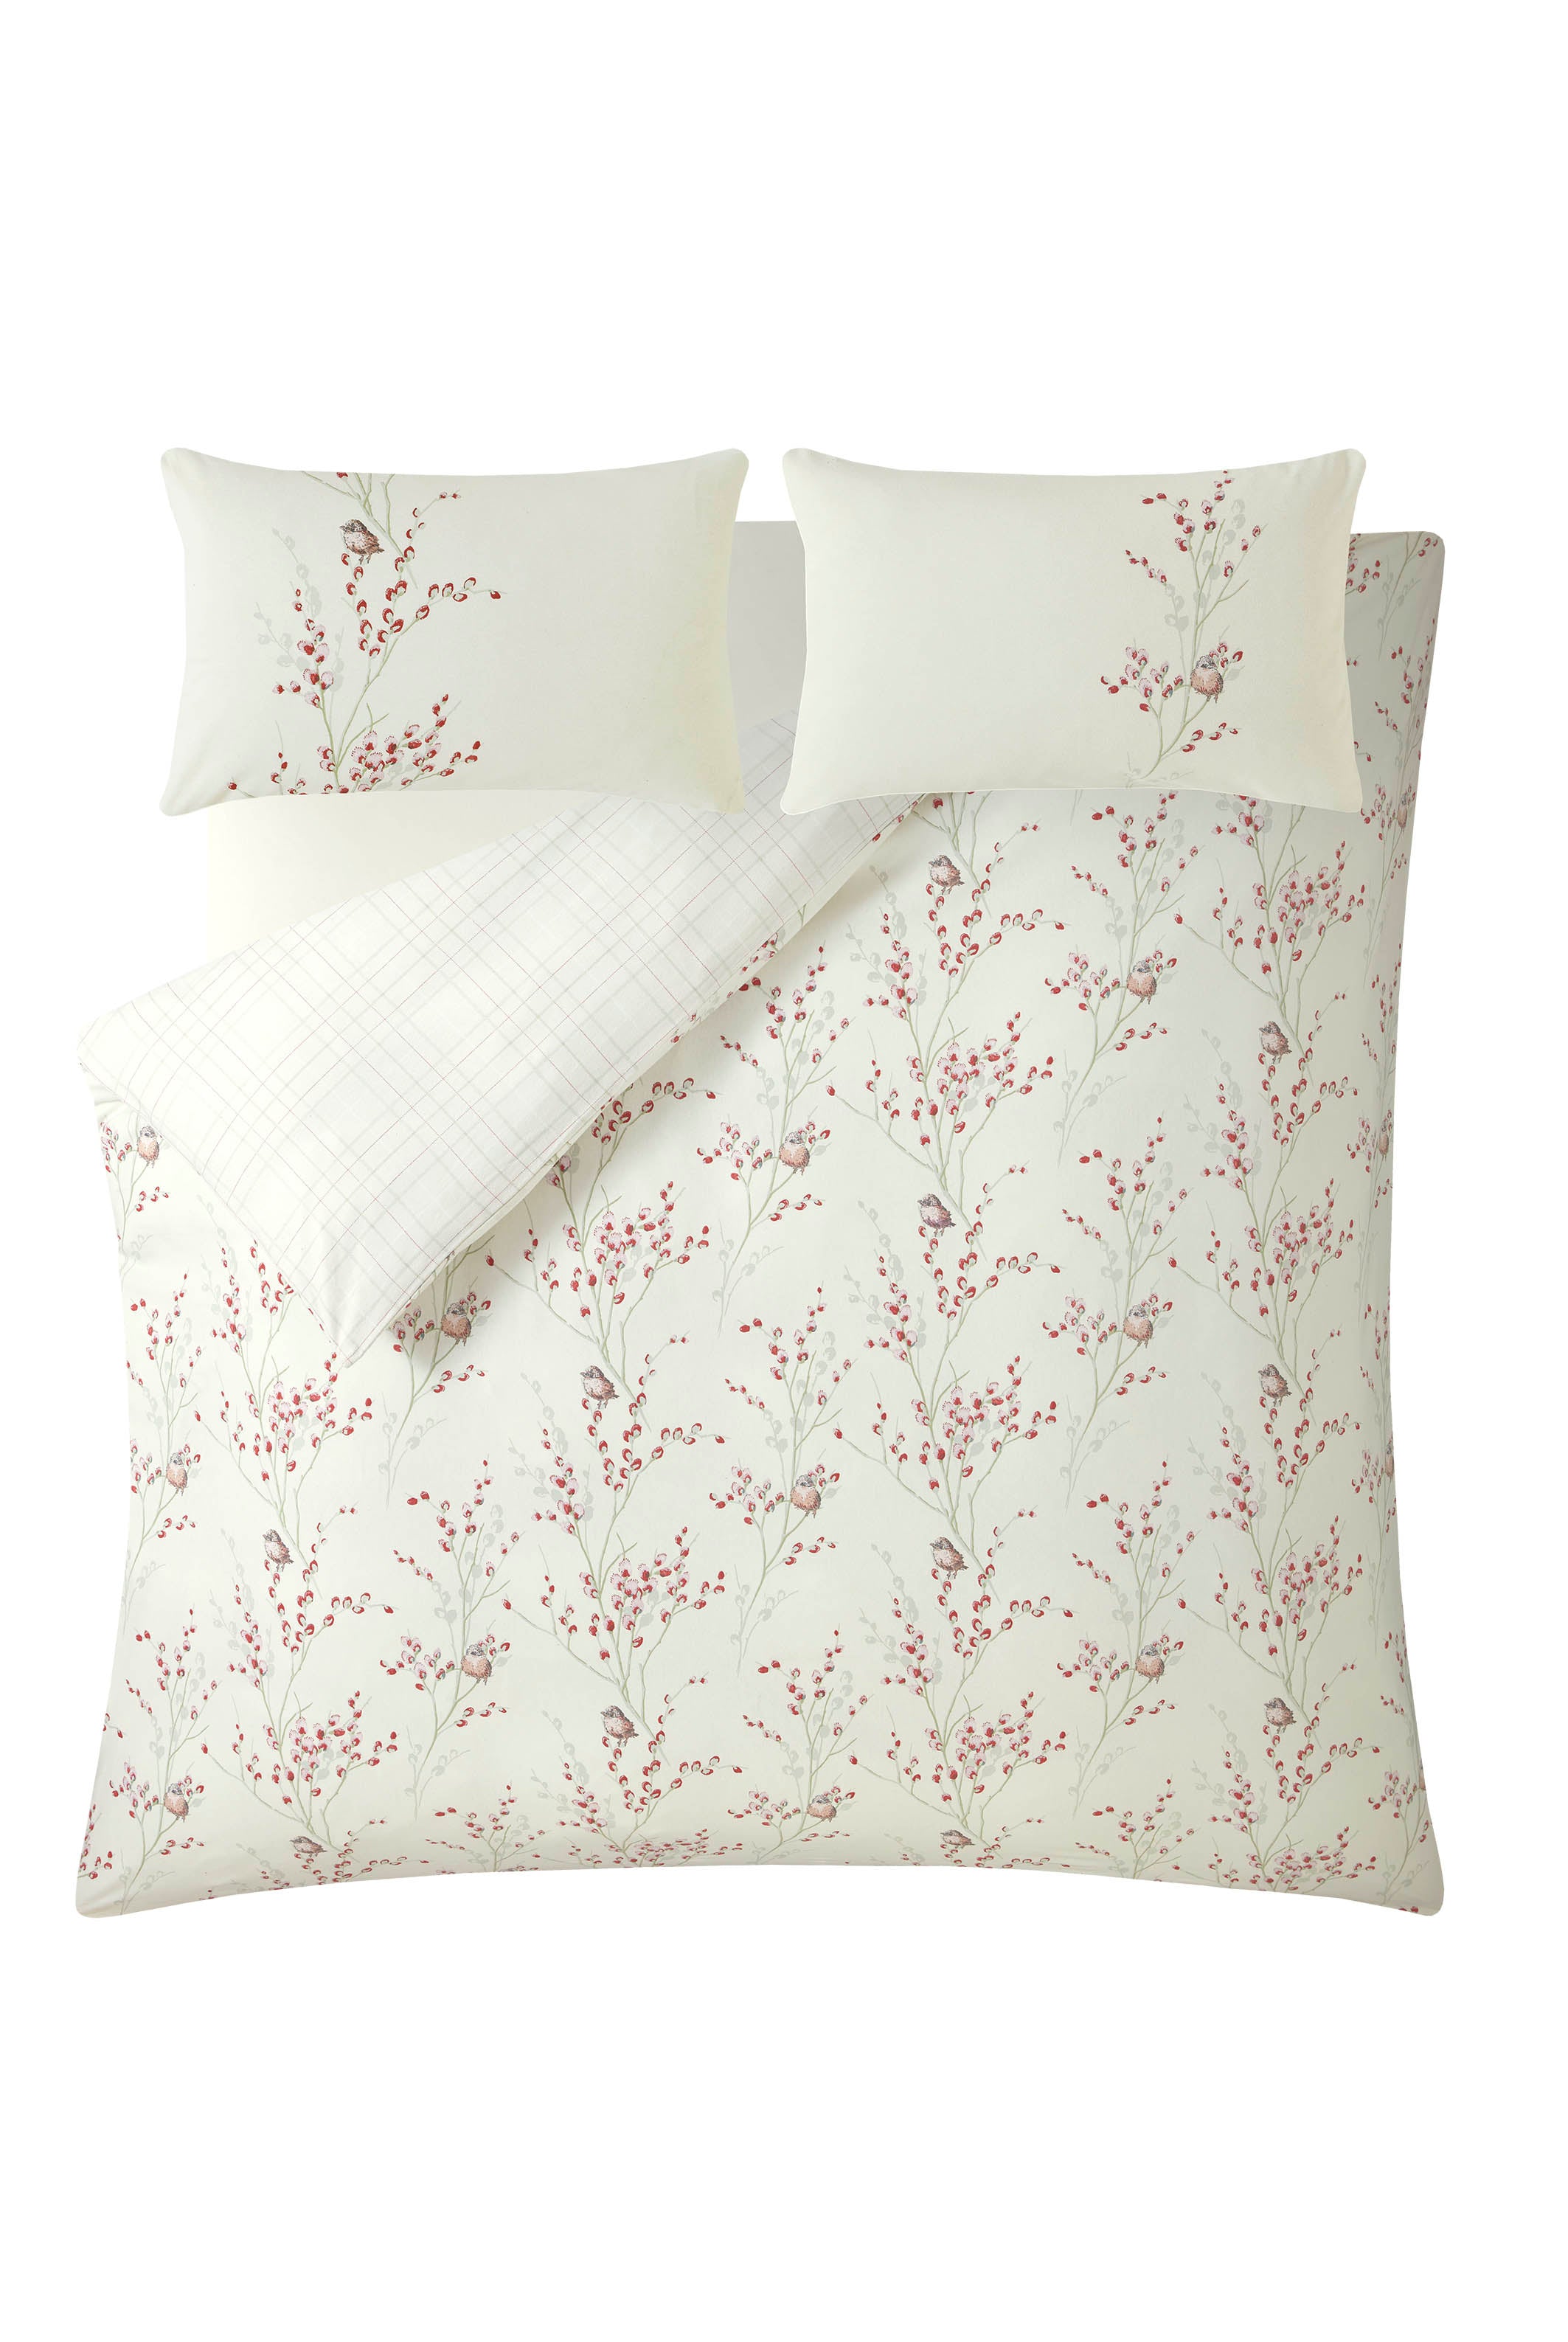 Laura Ashley Pussy Willow Winter Cranberry Red Duvet Cover and Pillowcase Set